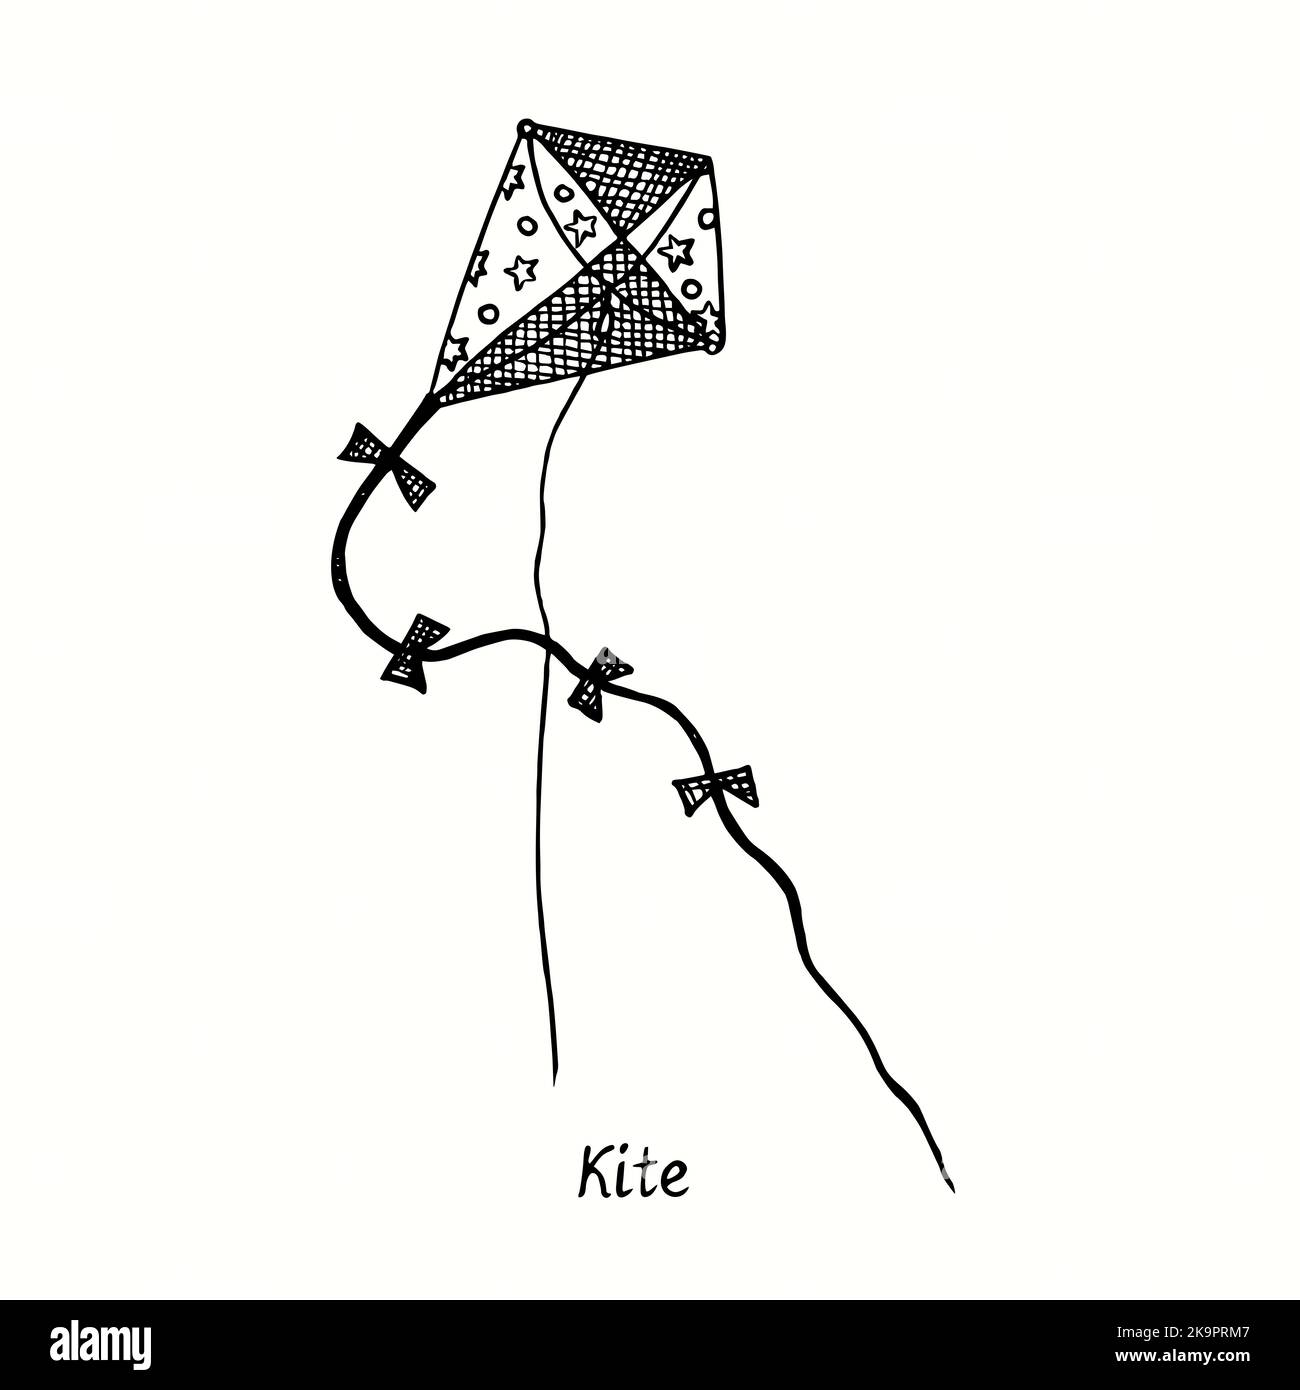 Kite. Ink black and white doodle drawing in woodcut style Stock Photo